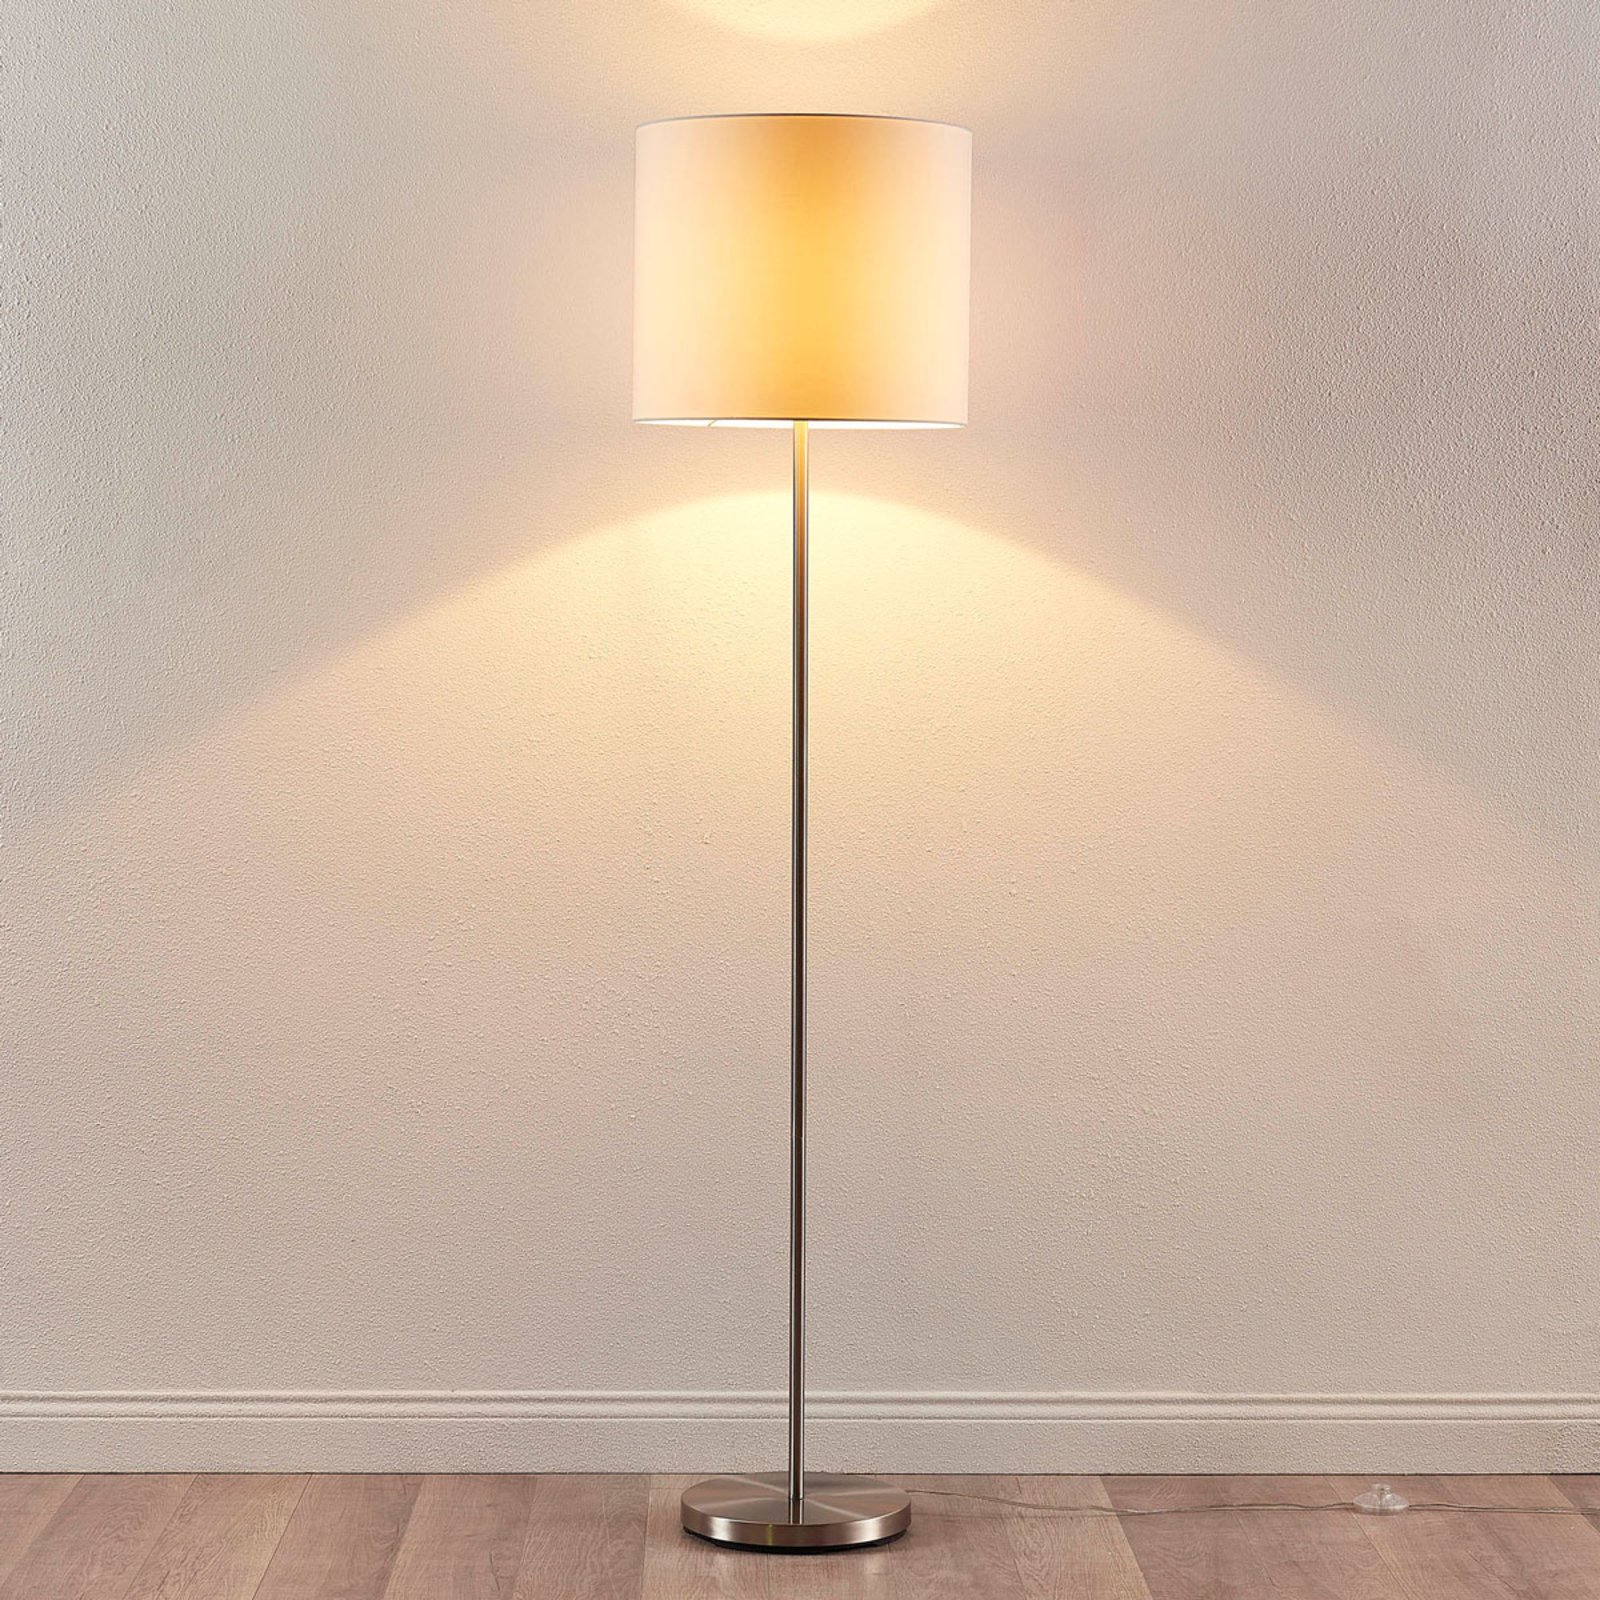 Parsa - floor lamp with white fabric lampshade